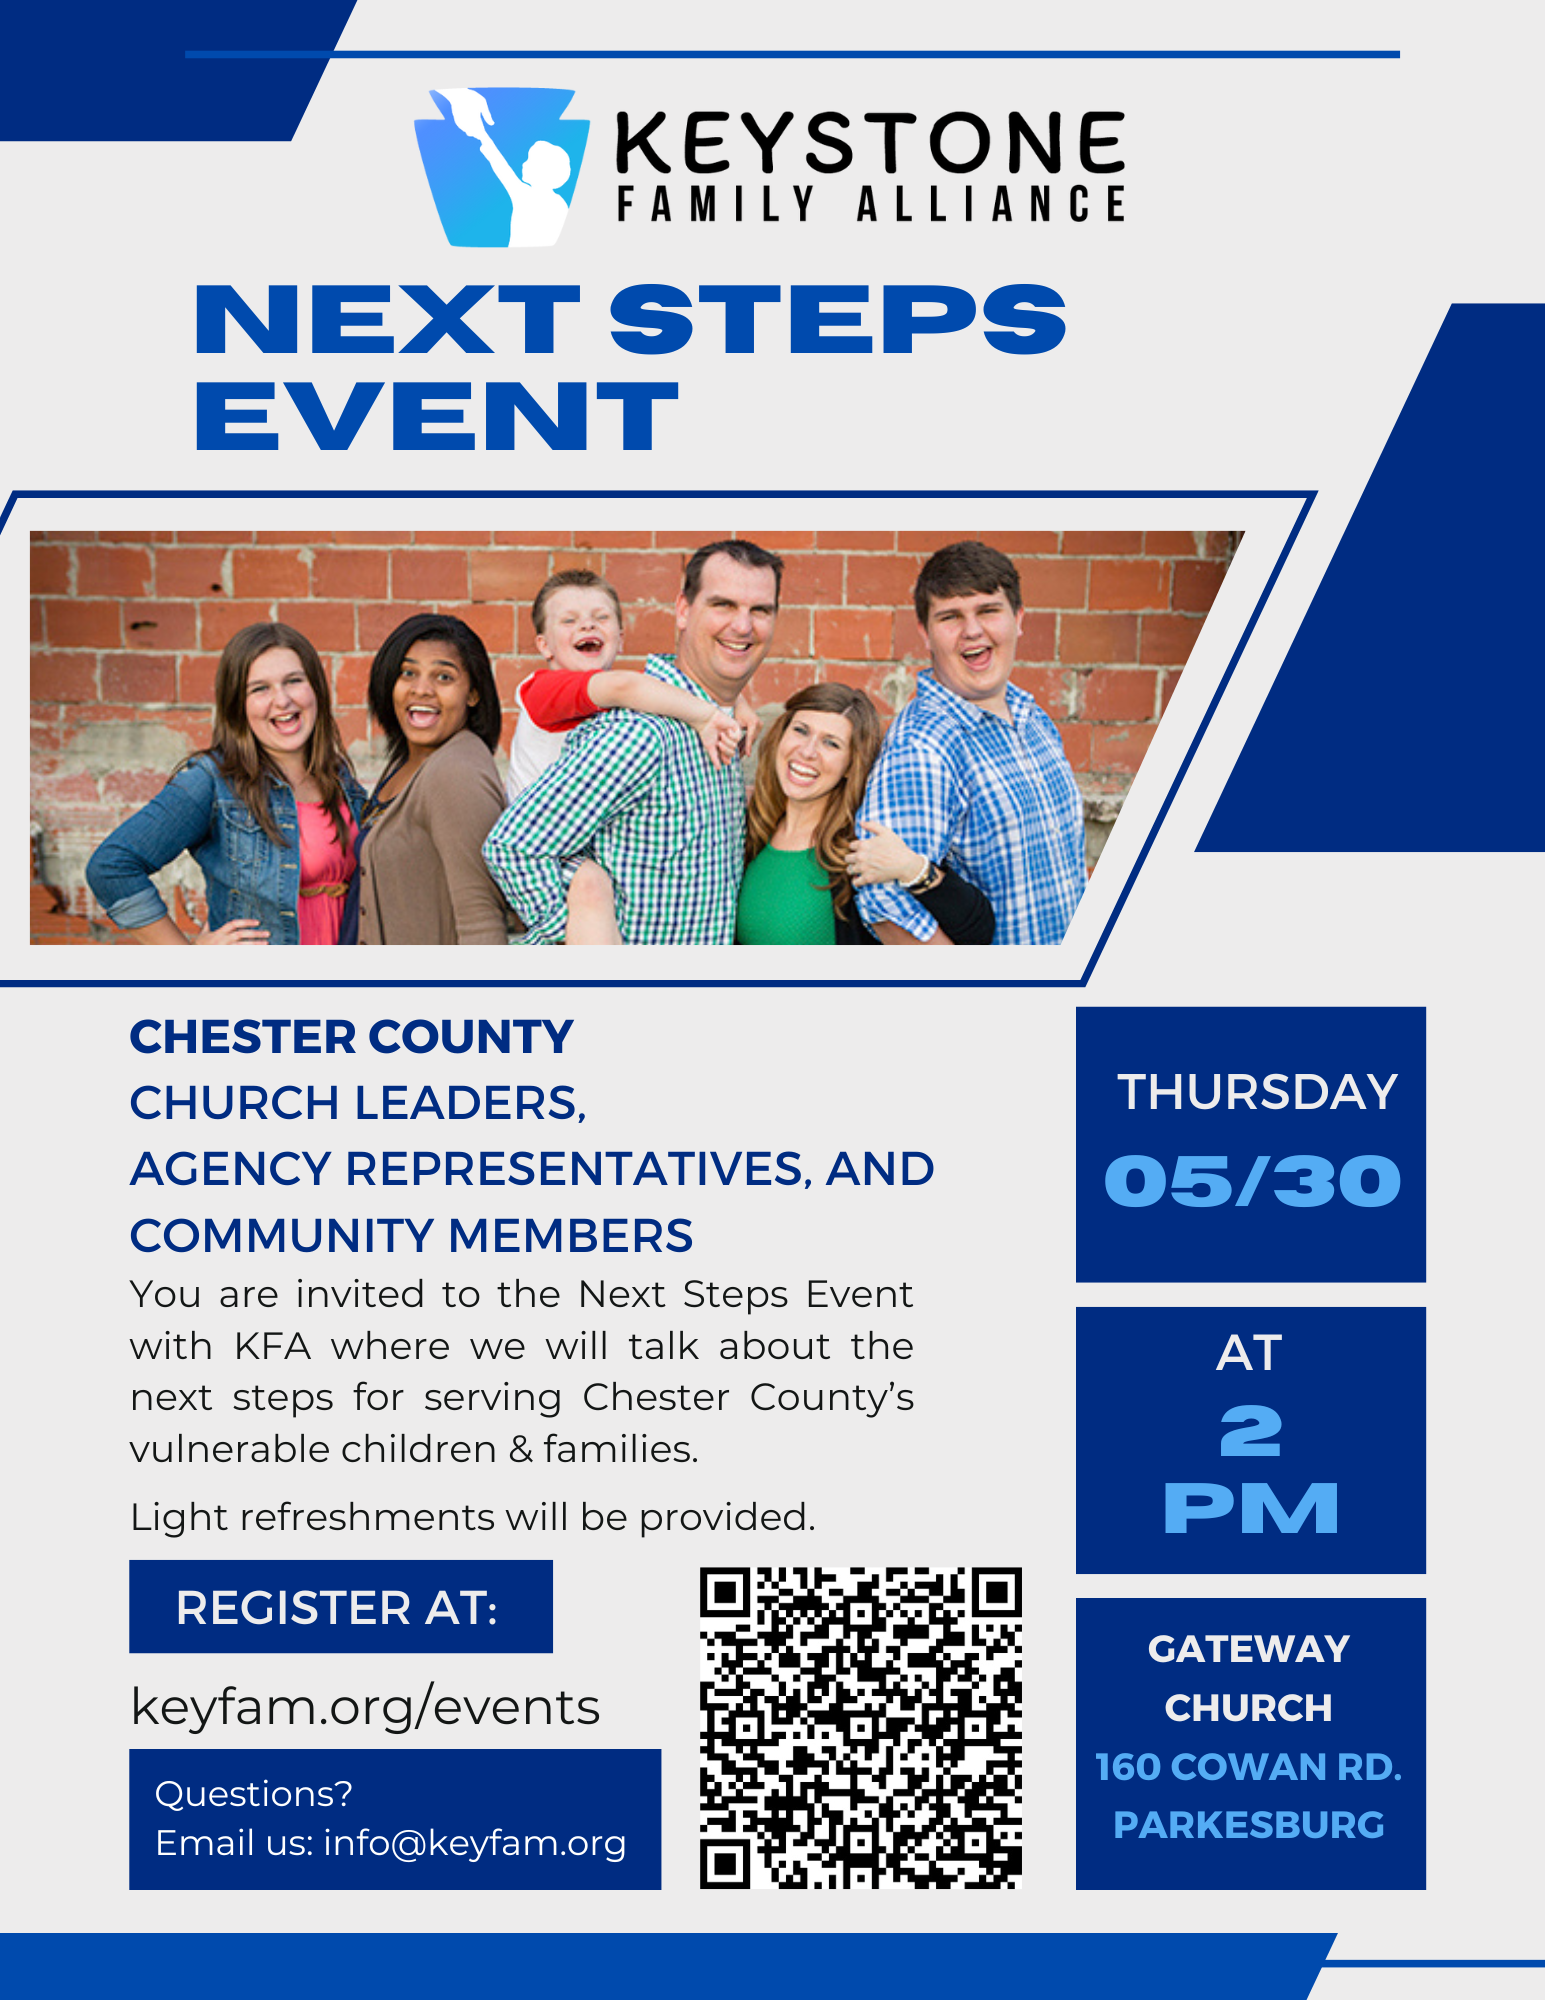 NEXT STEPS EVENT KEYSTONE FAMILY ALLIANCE for Chester County